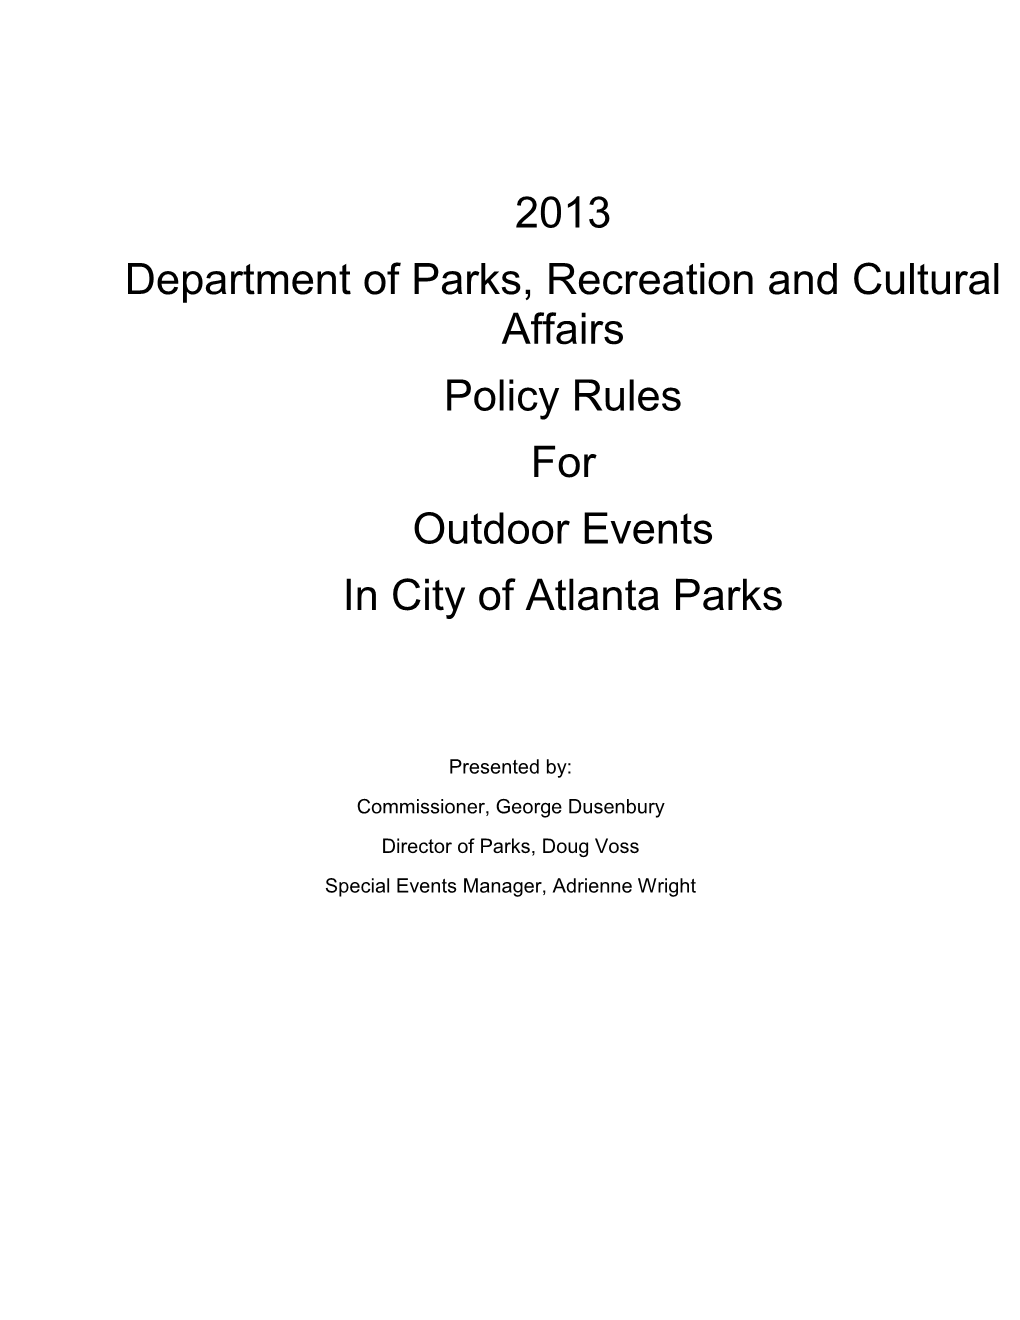 2013 Department of Parks, Recreation and Cultural Affairs Policy Rules for Outdoor Events in City of Atlanta Parks